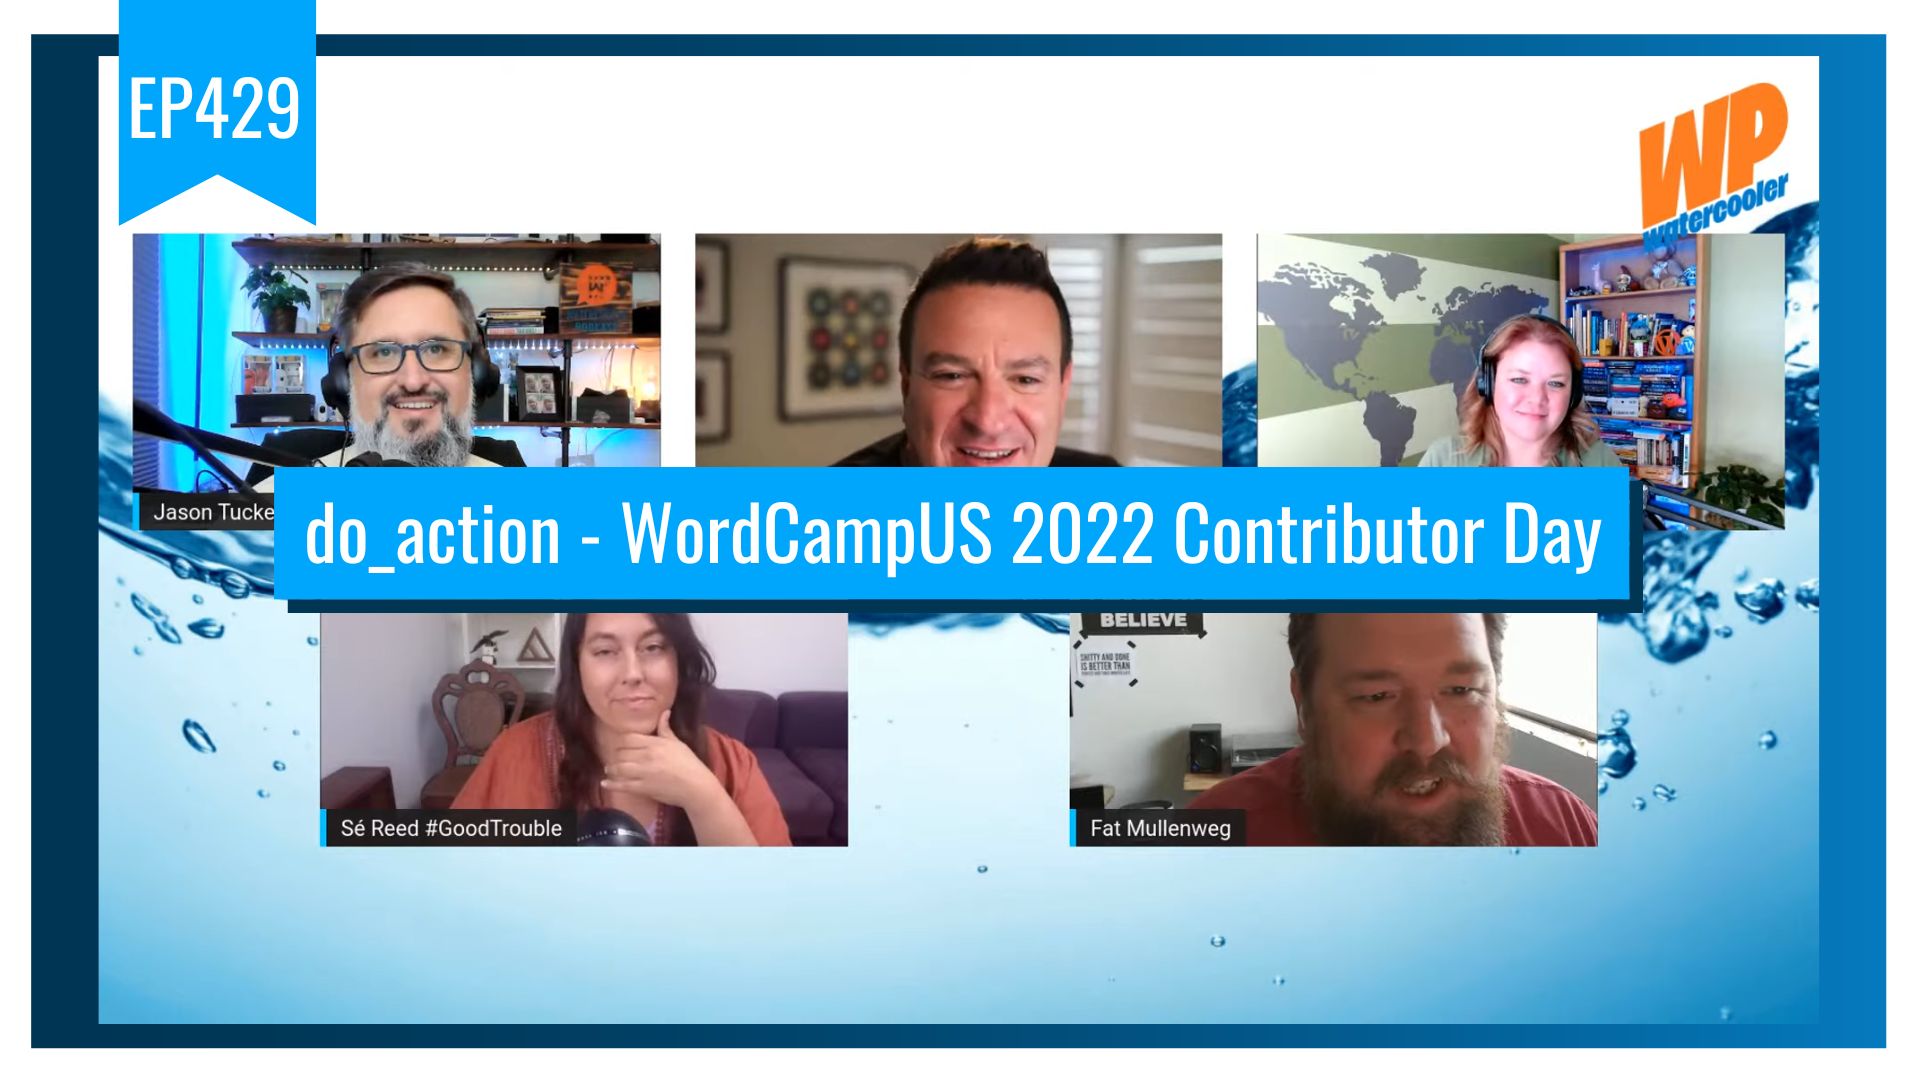 EP429 – do_action: WordCamp US 2002 Contributor Day